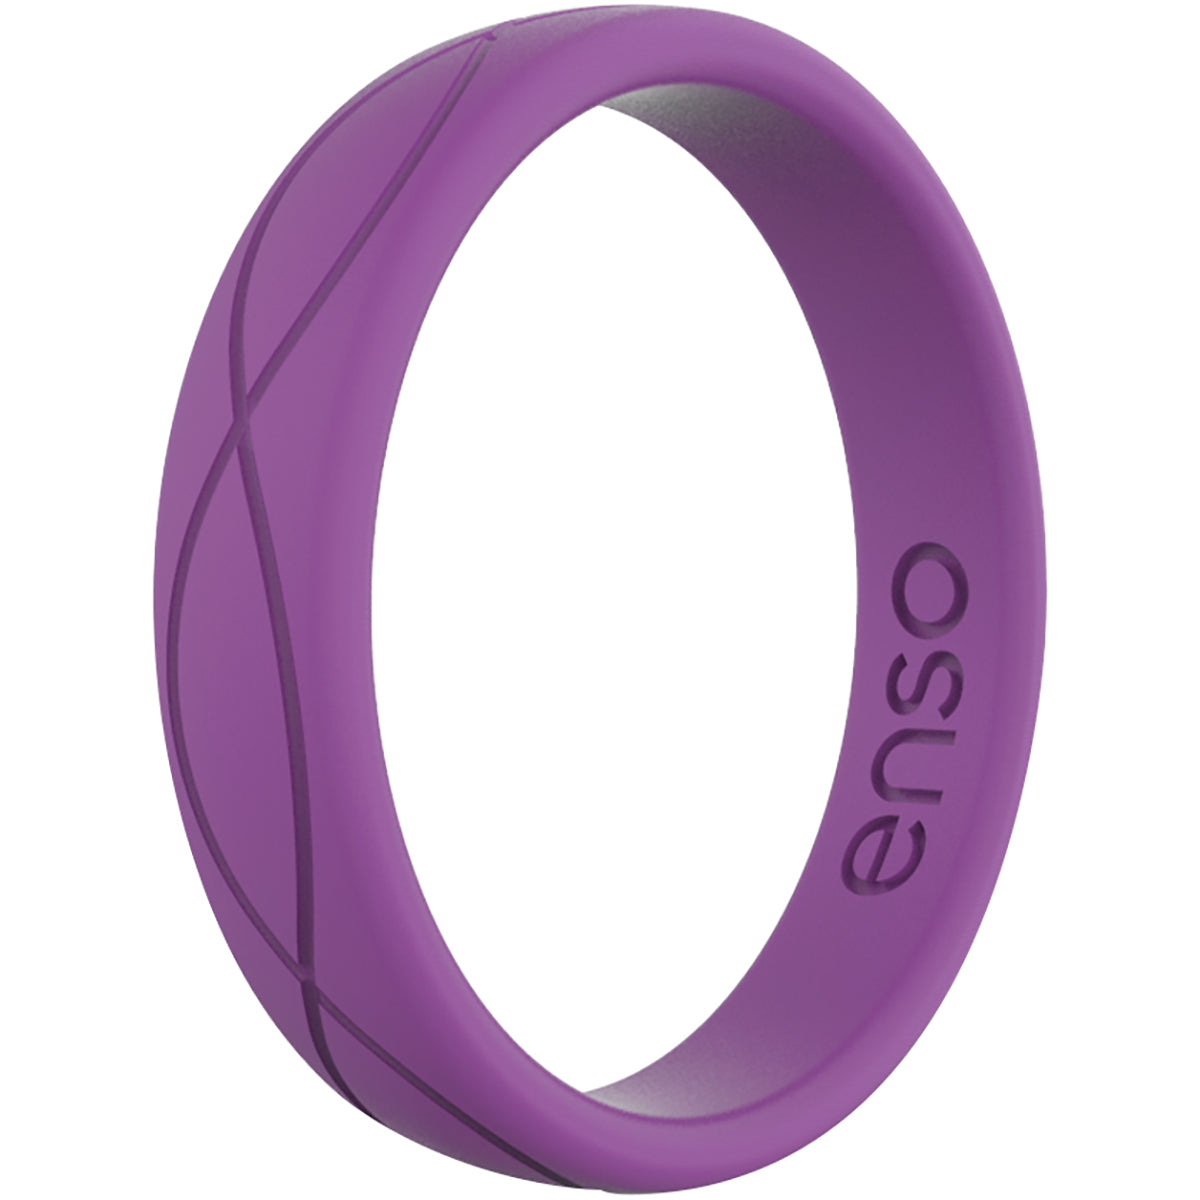 Enso Rings Women's Infinity Series Silicone Ring - Plum Enso Rings